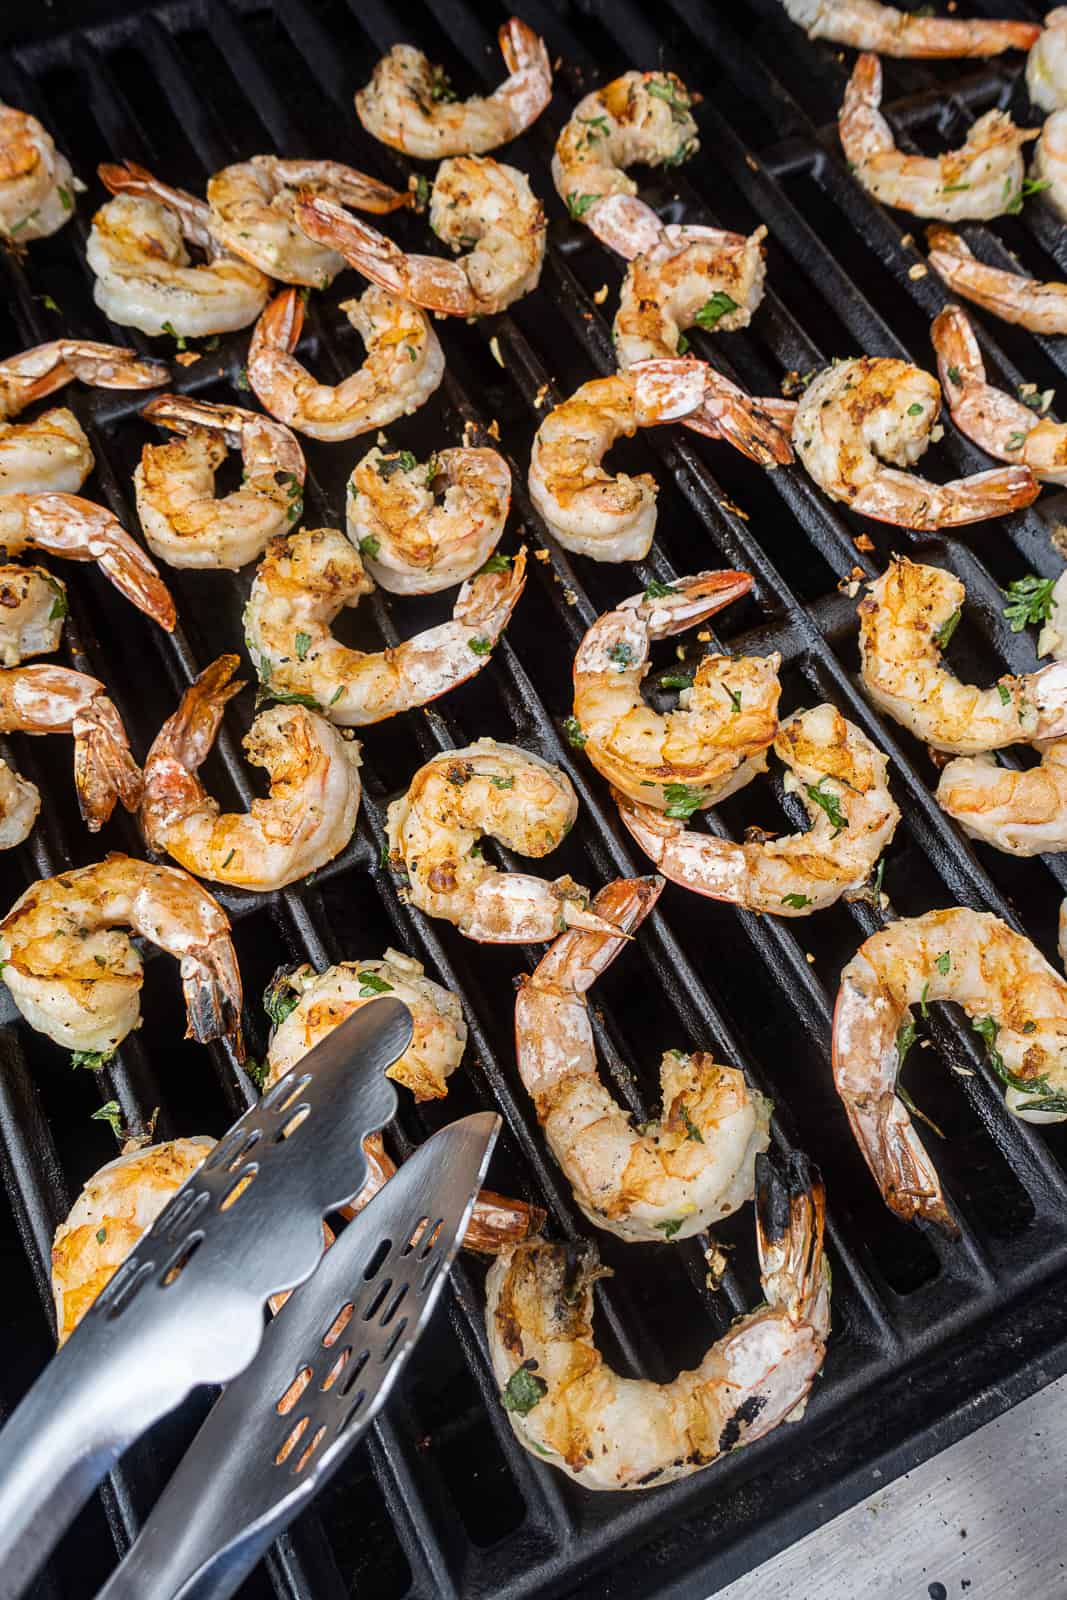 Grilling Jumbo Shrimp with Marinade On Gas Grill